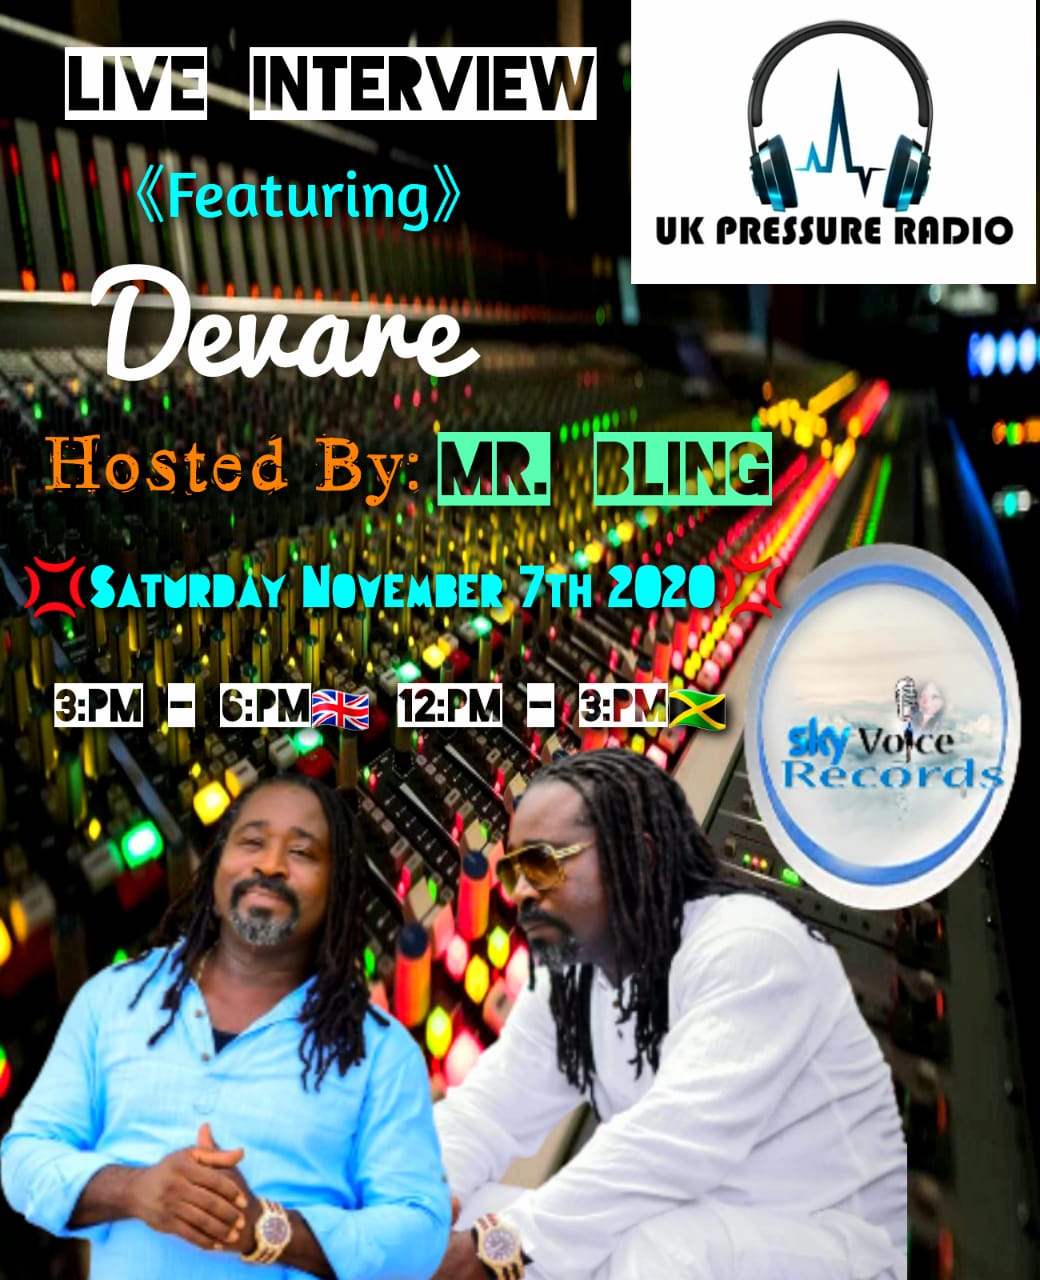 Interview with Mr. Bling UK Pressure Radio